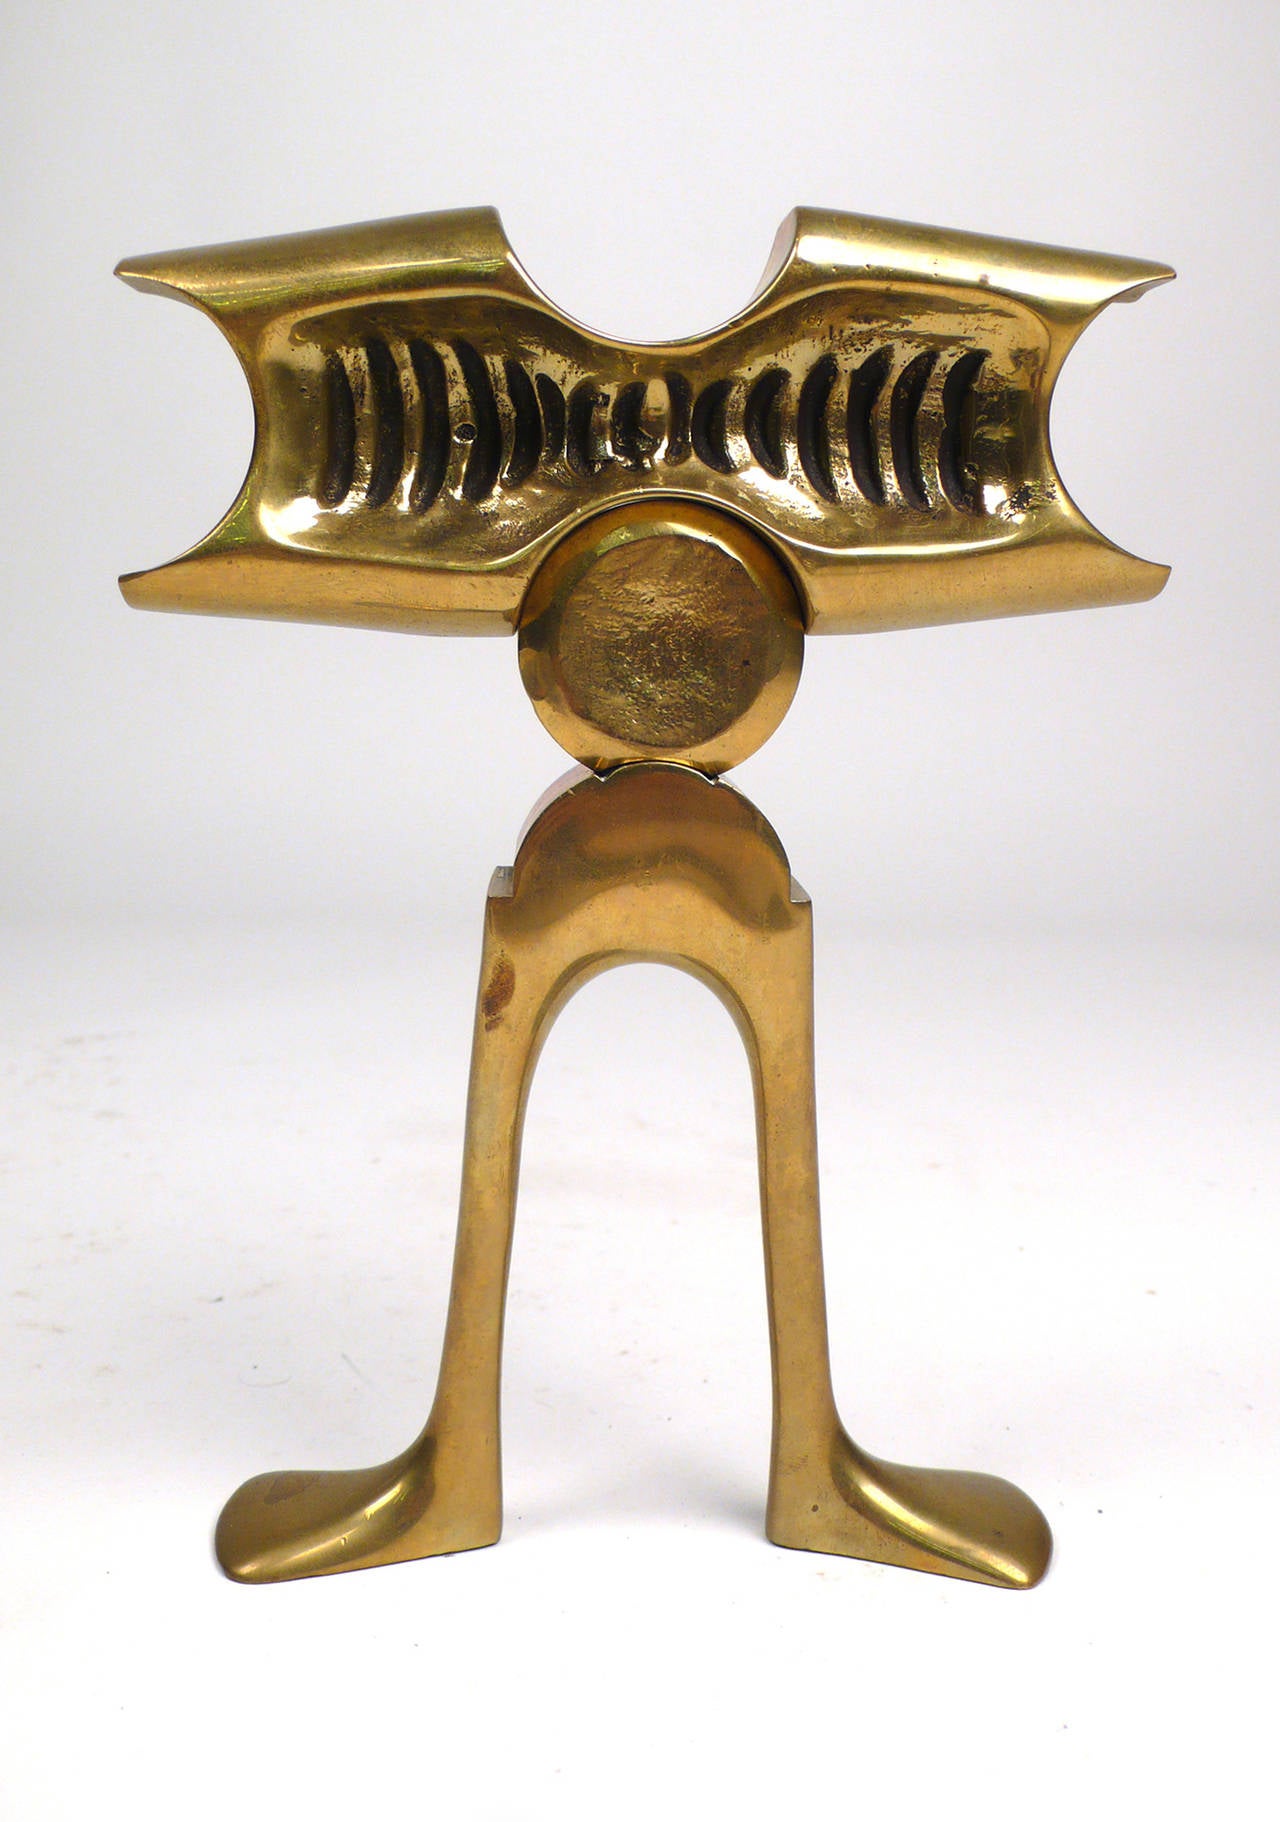 Solid brass modular tabletop sculpture by Israeli modernist Aharon Bezalel. Titled 'man for play' and number 9 from an edition of 200. Signed and dated to foot. Designed to be interactive and to spawn creativity.